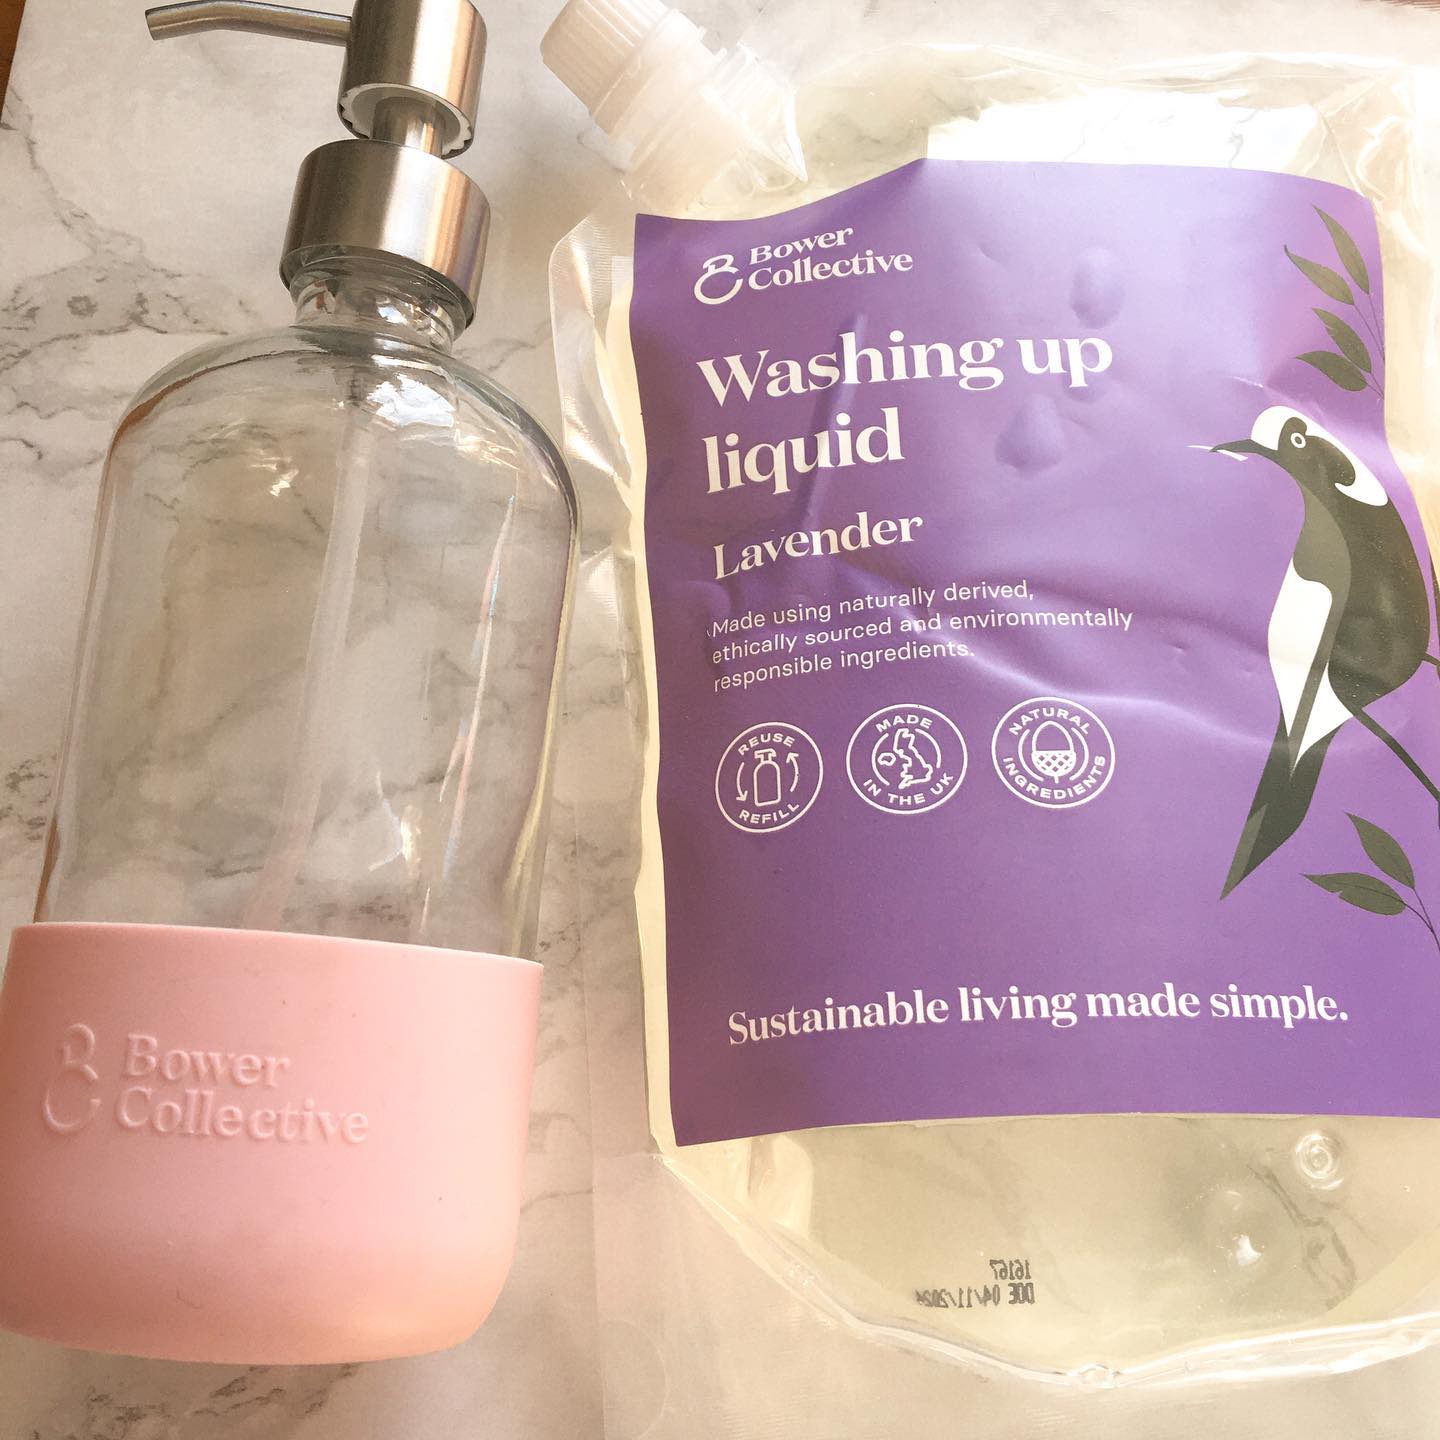 Check out my review of @bowercollective ‘s lavender washing up liquid new to my blog! 
-
They currently have an amazing deal where you can get £15 off with orders over £20 & a FREE Tony’s Chocolonely bar! The link is in my bio 🎉
-
#sustainableblogger #bowercollective #ecowashingupliquid #sustainableswaps #ecoblogger #ecofriendlyblogger #newblogpost #ecofriendlyproducts #bournemouthblogger #sustainability #sustainableliving #cheltenhambloggersuk #cheltenhamblogger